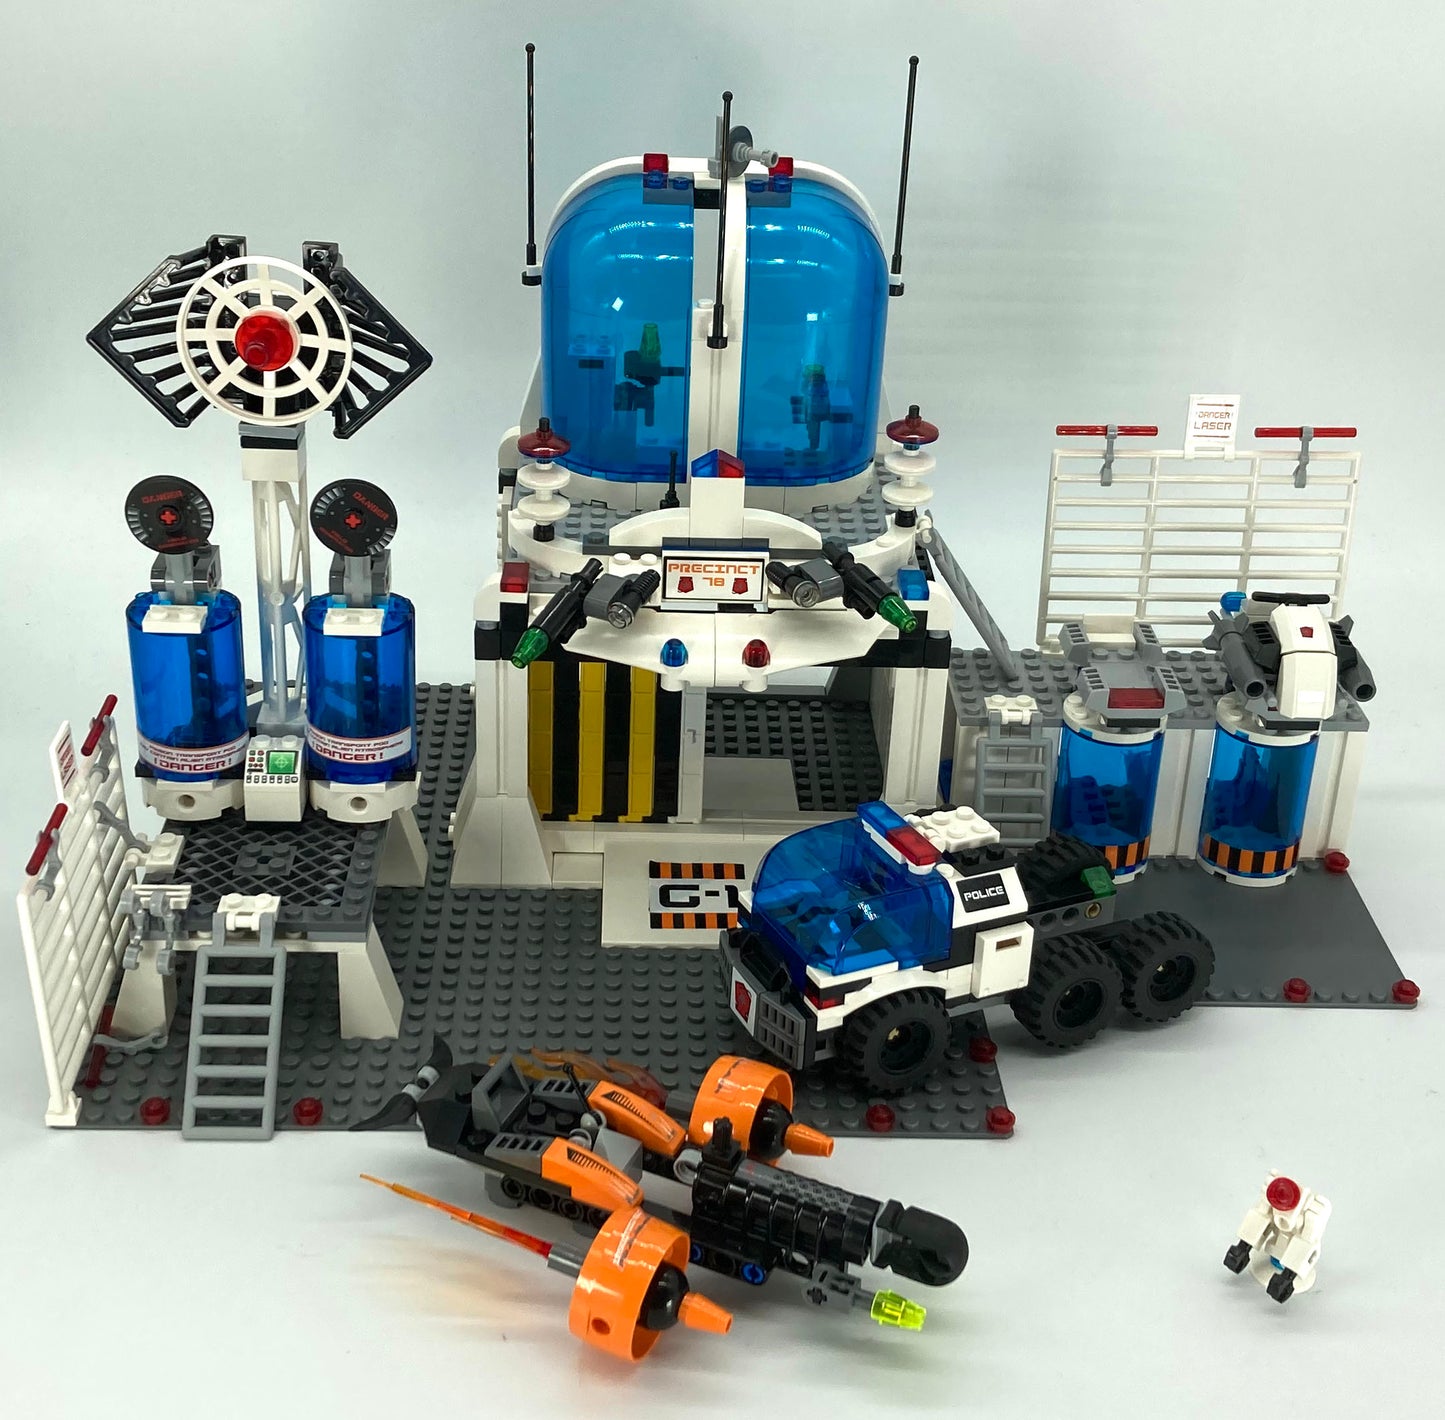 Used Set 5985 Space Police Central (No Instruction Manual or Box)